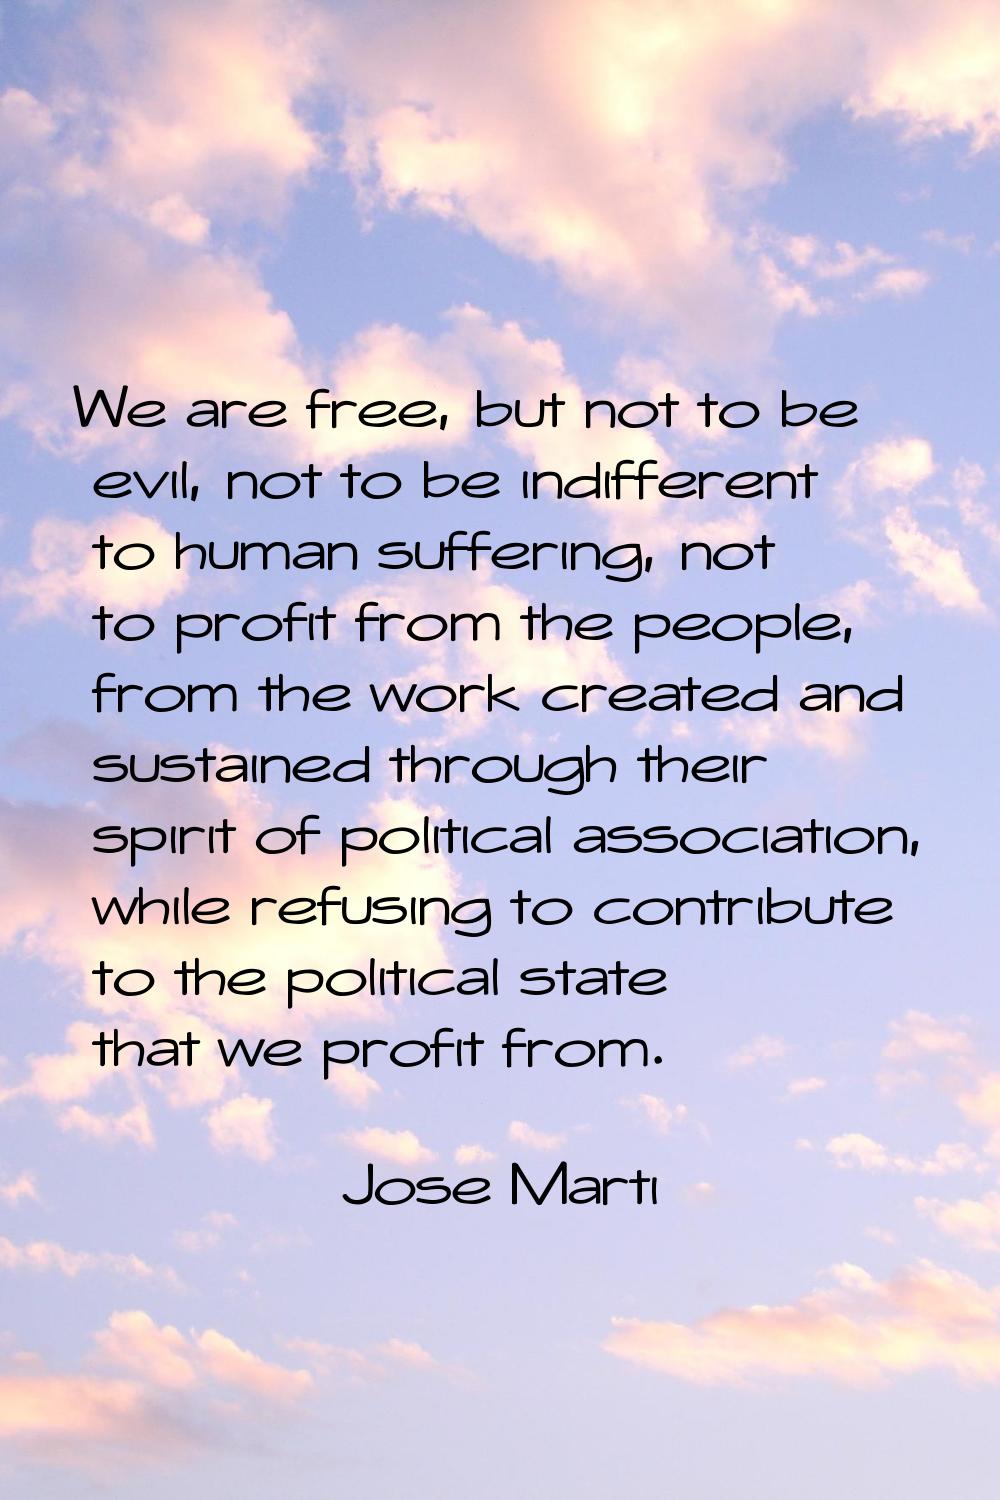 We are free, but not to be evil, not to be indifferent to human suffering, not to profit from the p